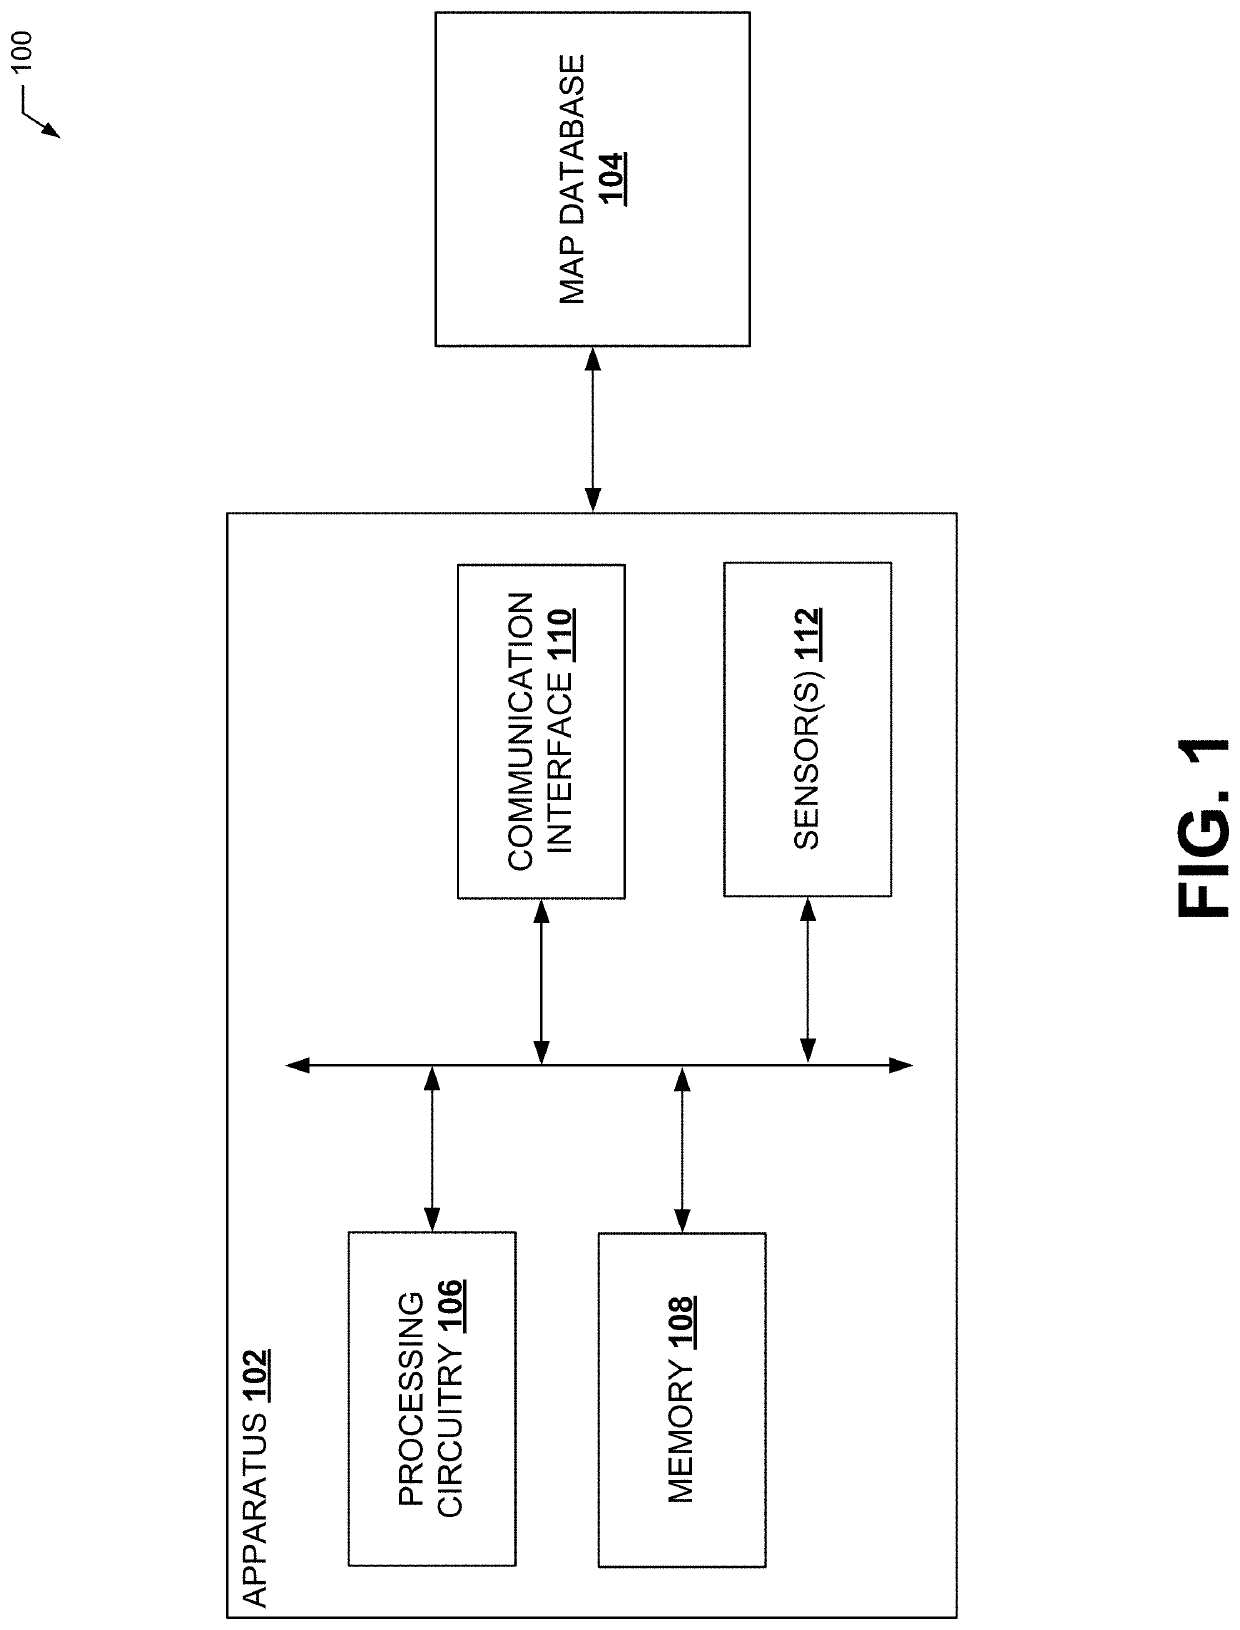 Method, apparatus, and computer program product for predicting autonomous transition regions using historical information